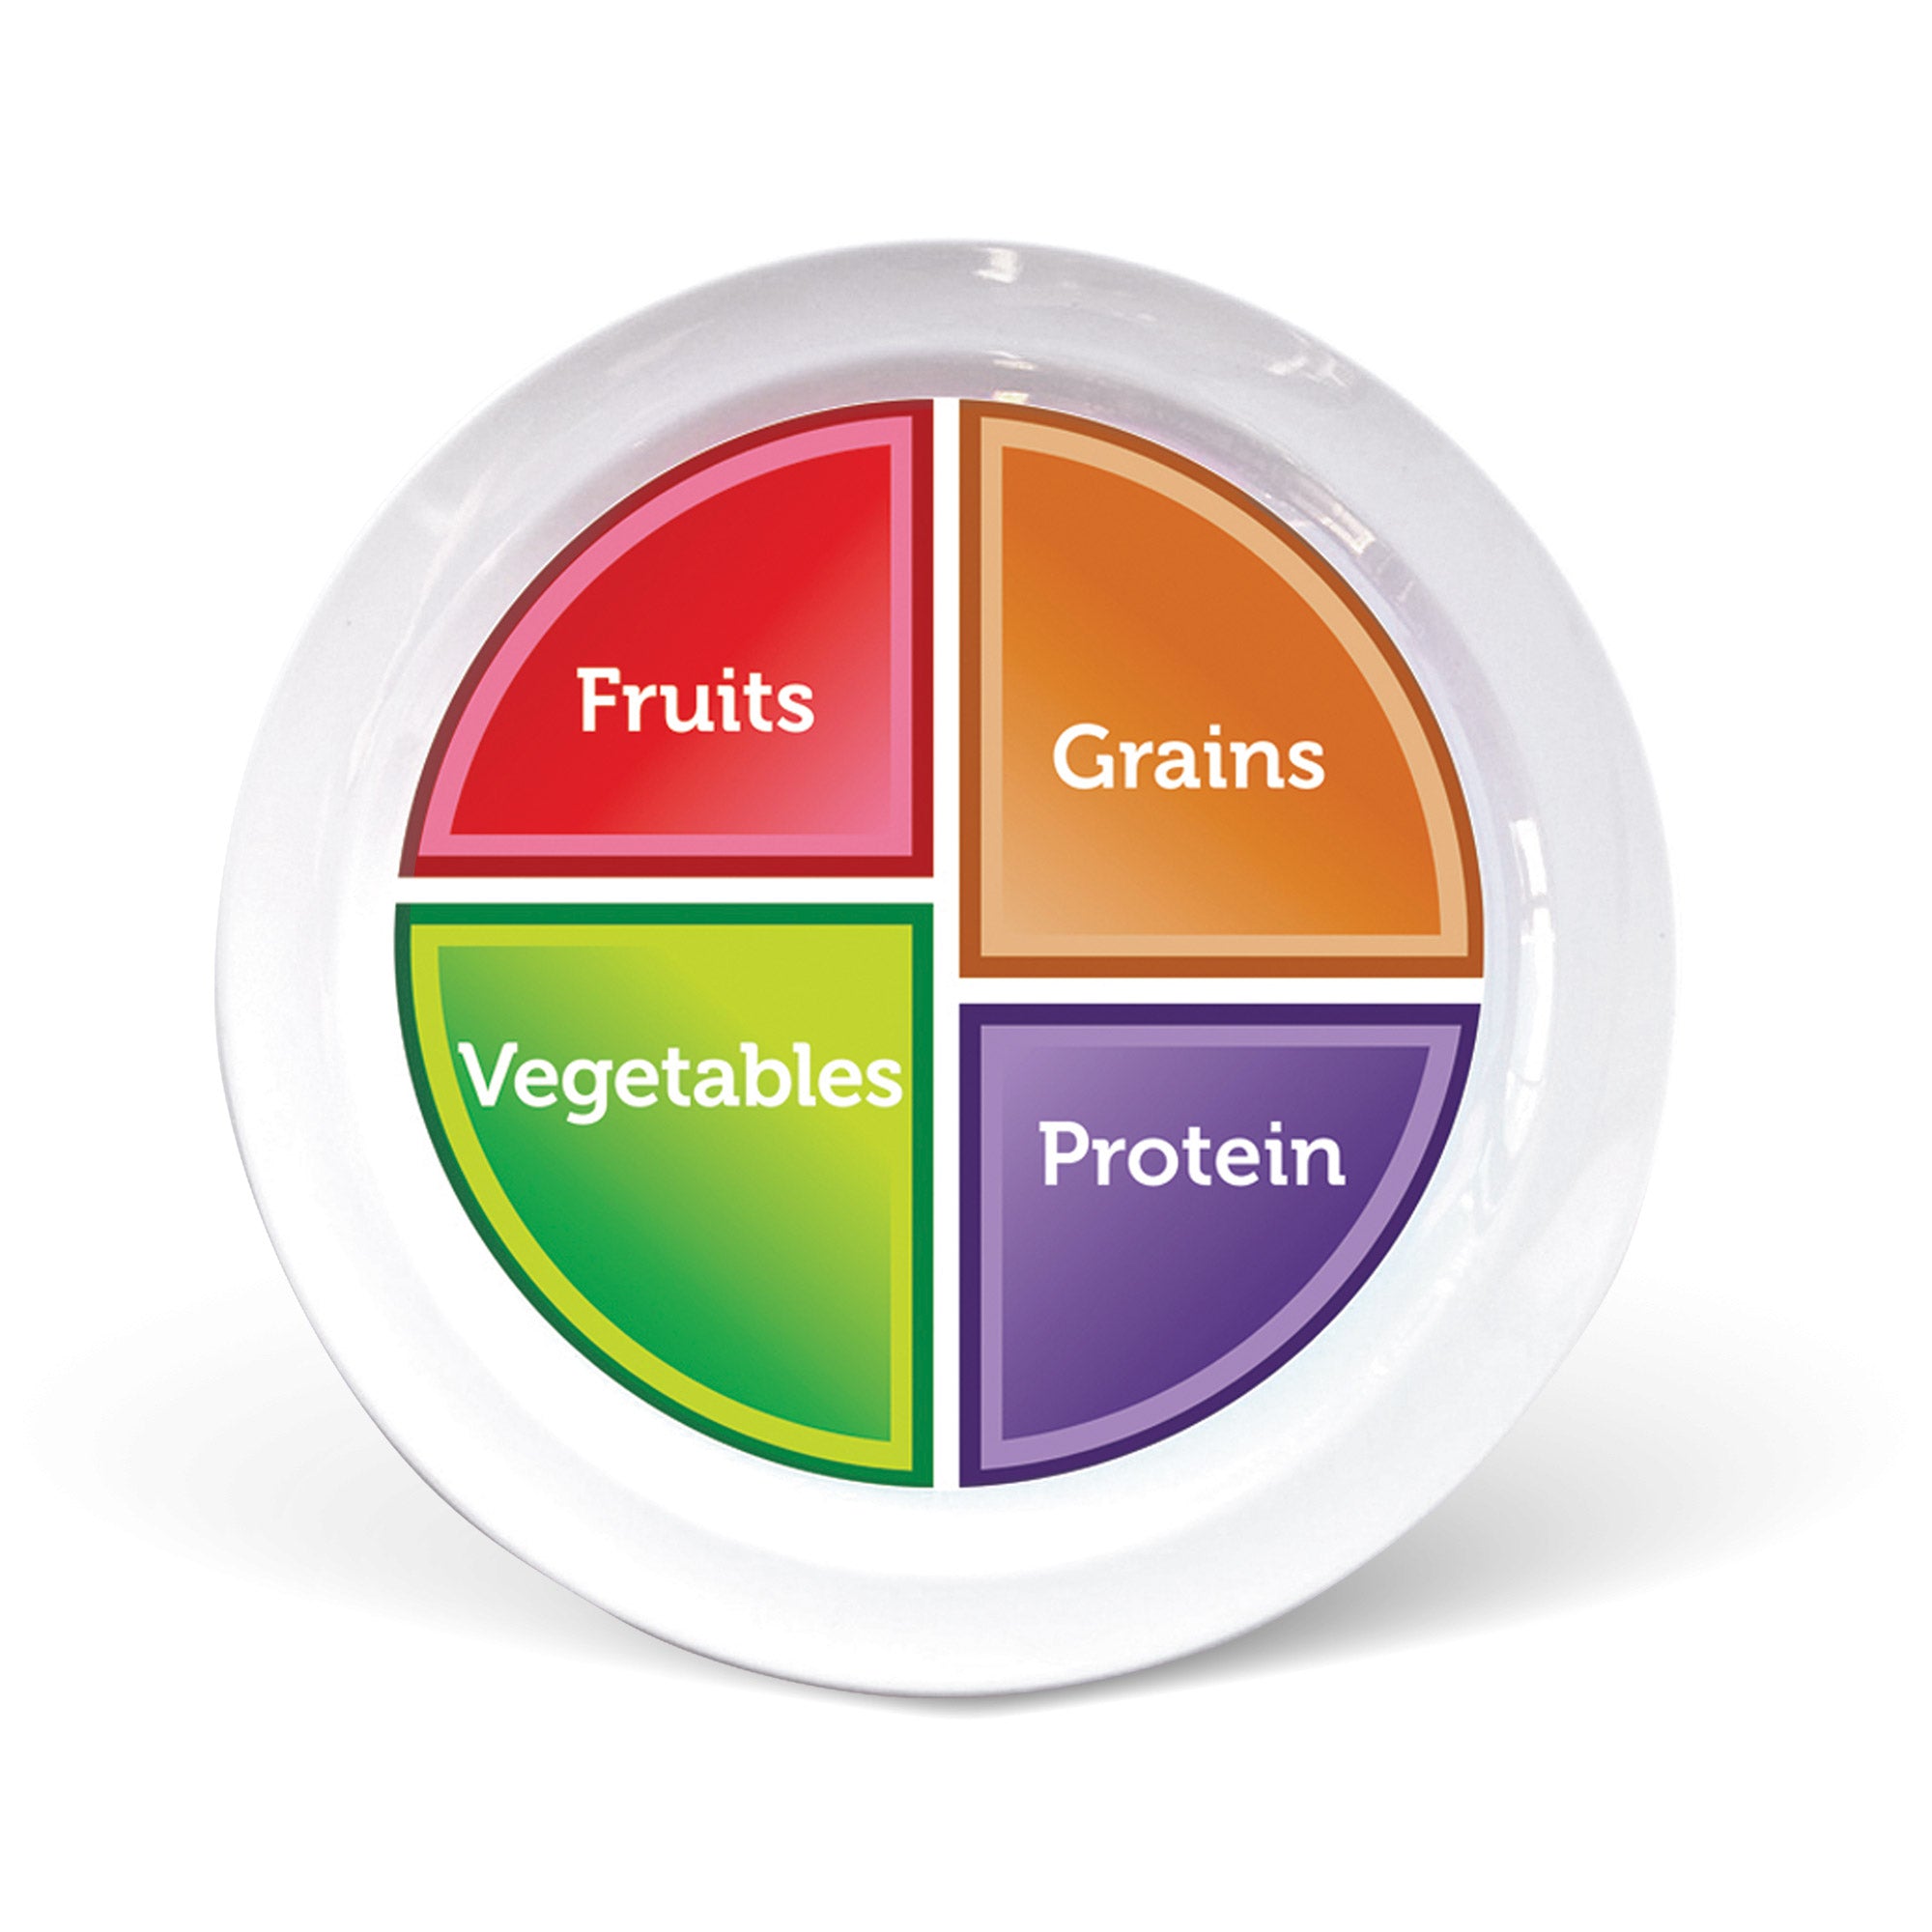 choose-myplate-portion-plate-for-adults-and-teens-health-beet